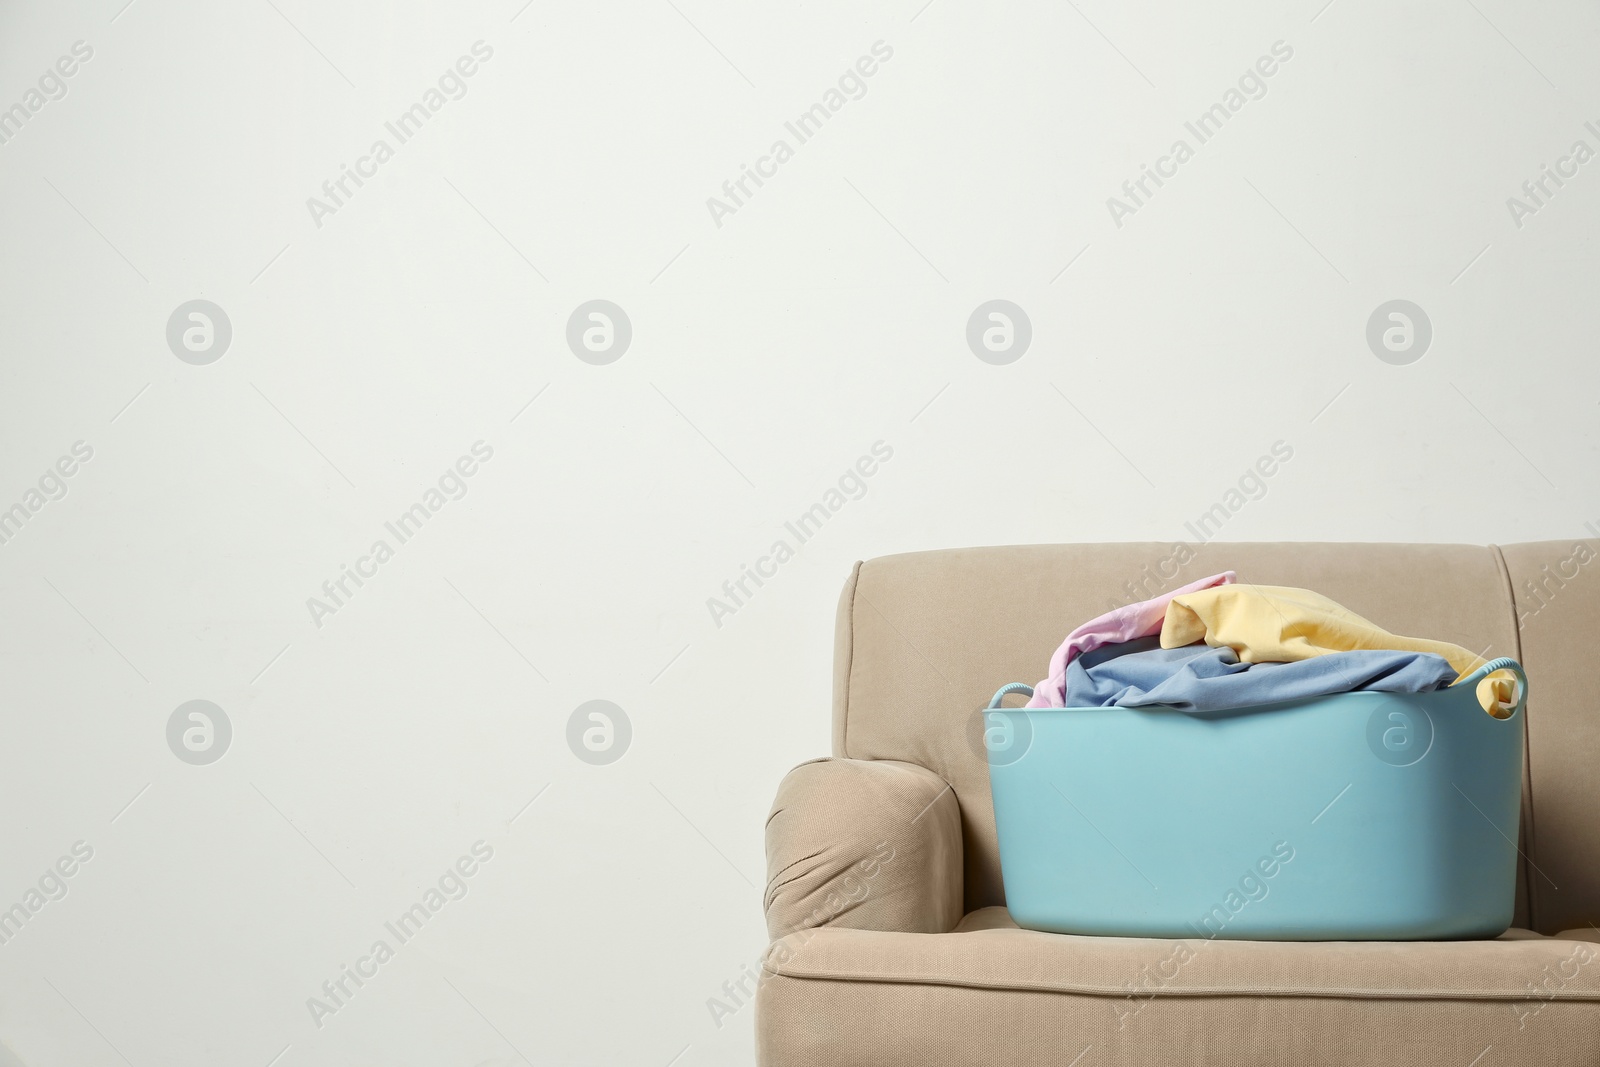 Photo of Laundry basket with dirty clothes on sofa at wall, space for text